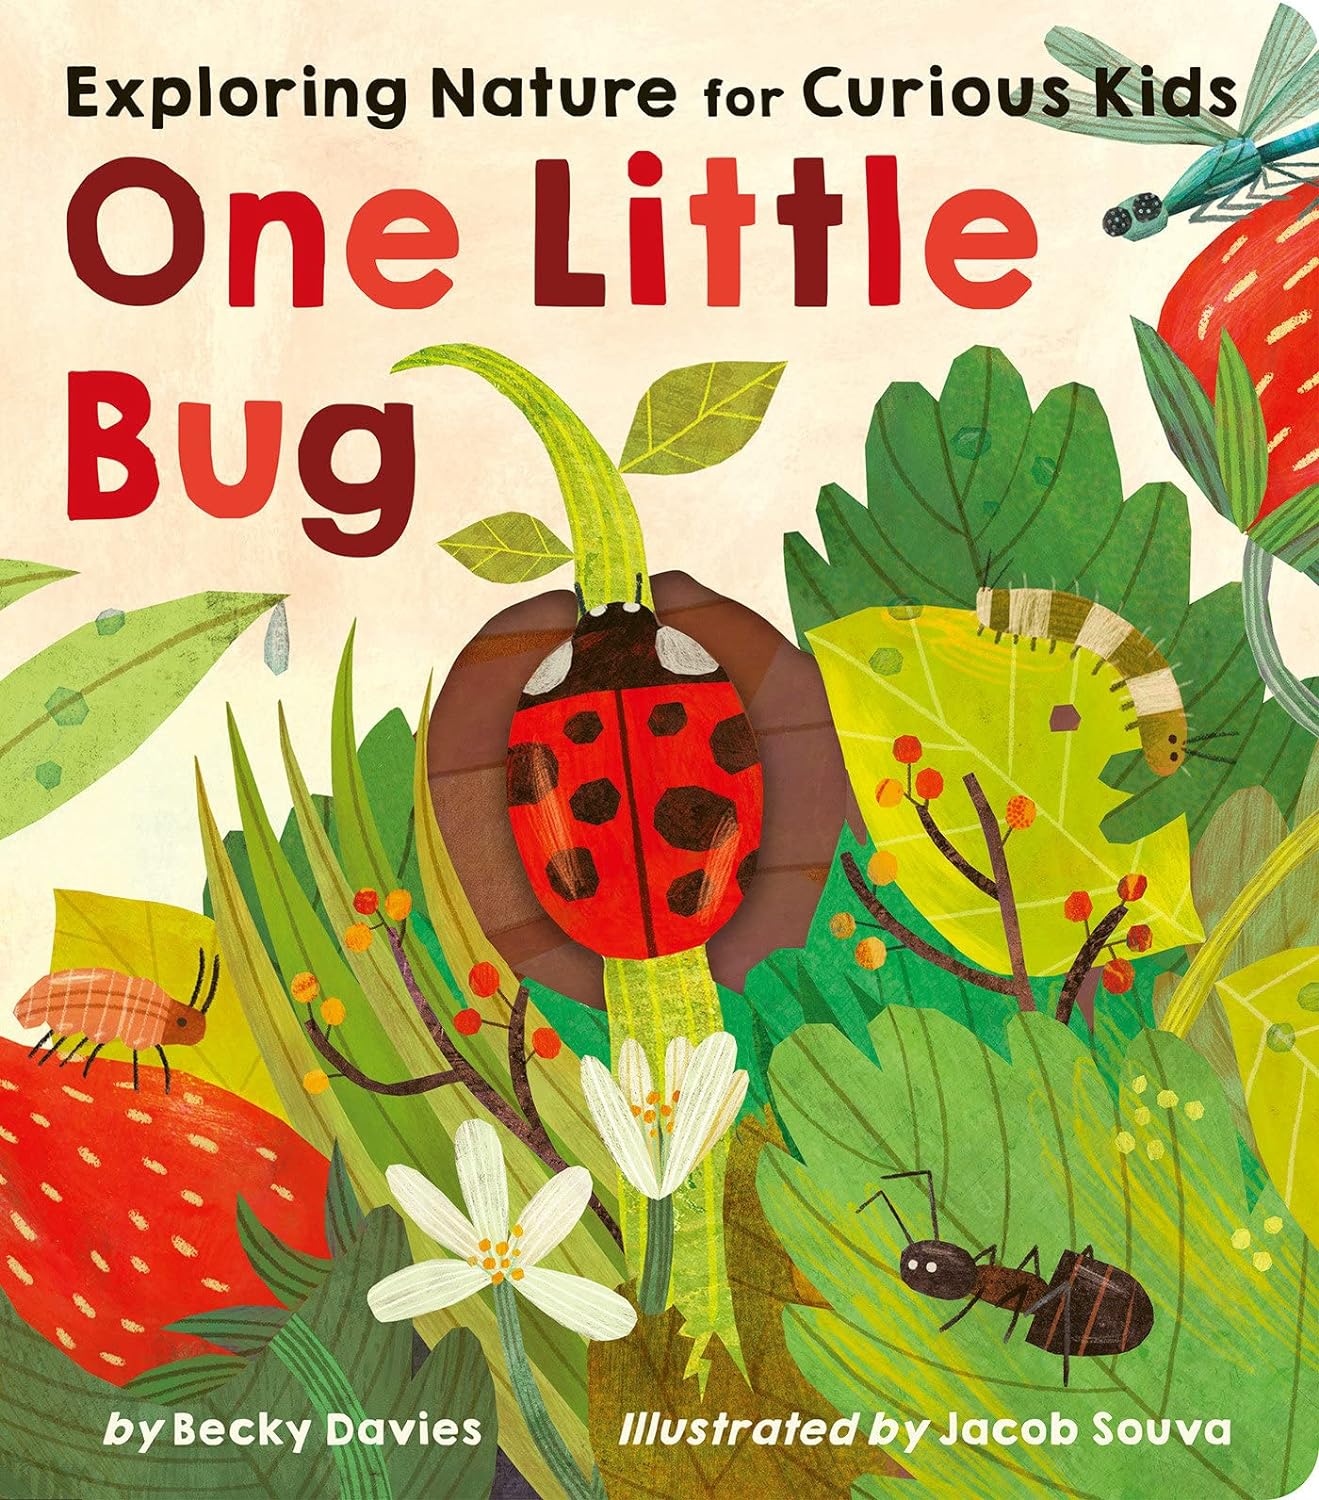 little tiger One Little Bug: Exploring Nature for Curious Kids Board book – Lift the flap, by Becky Davies (Author), Jacob Souva (Illustrator) Hardcover